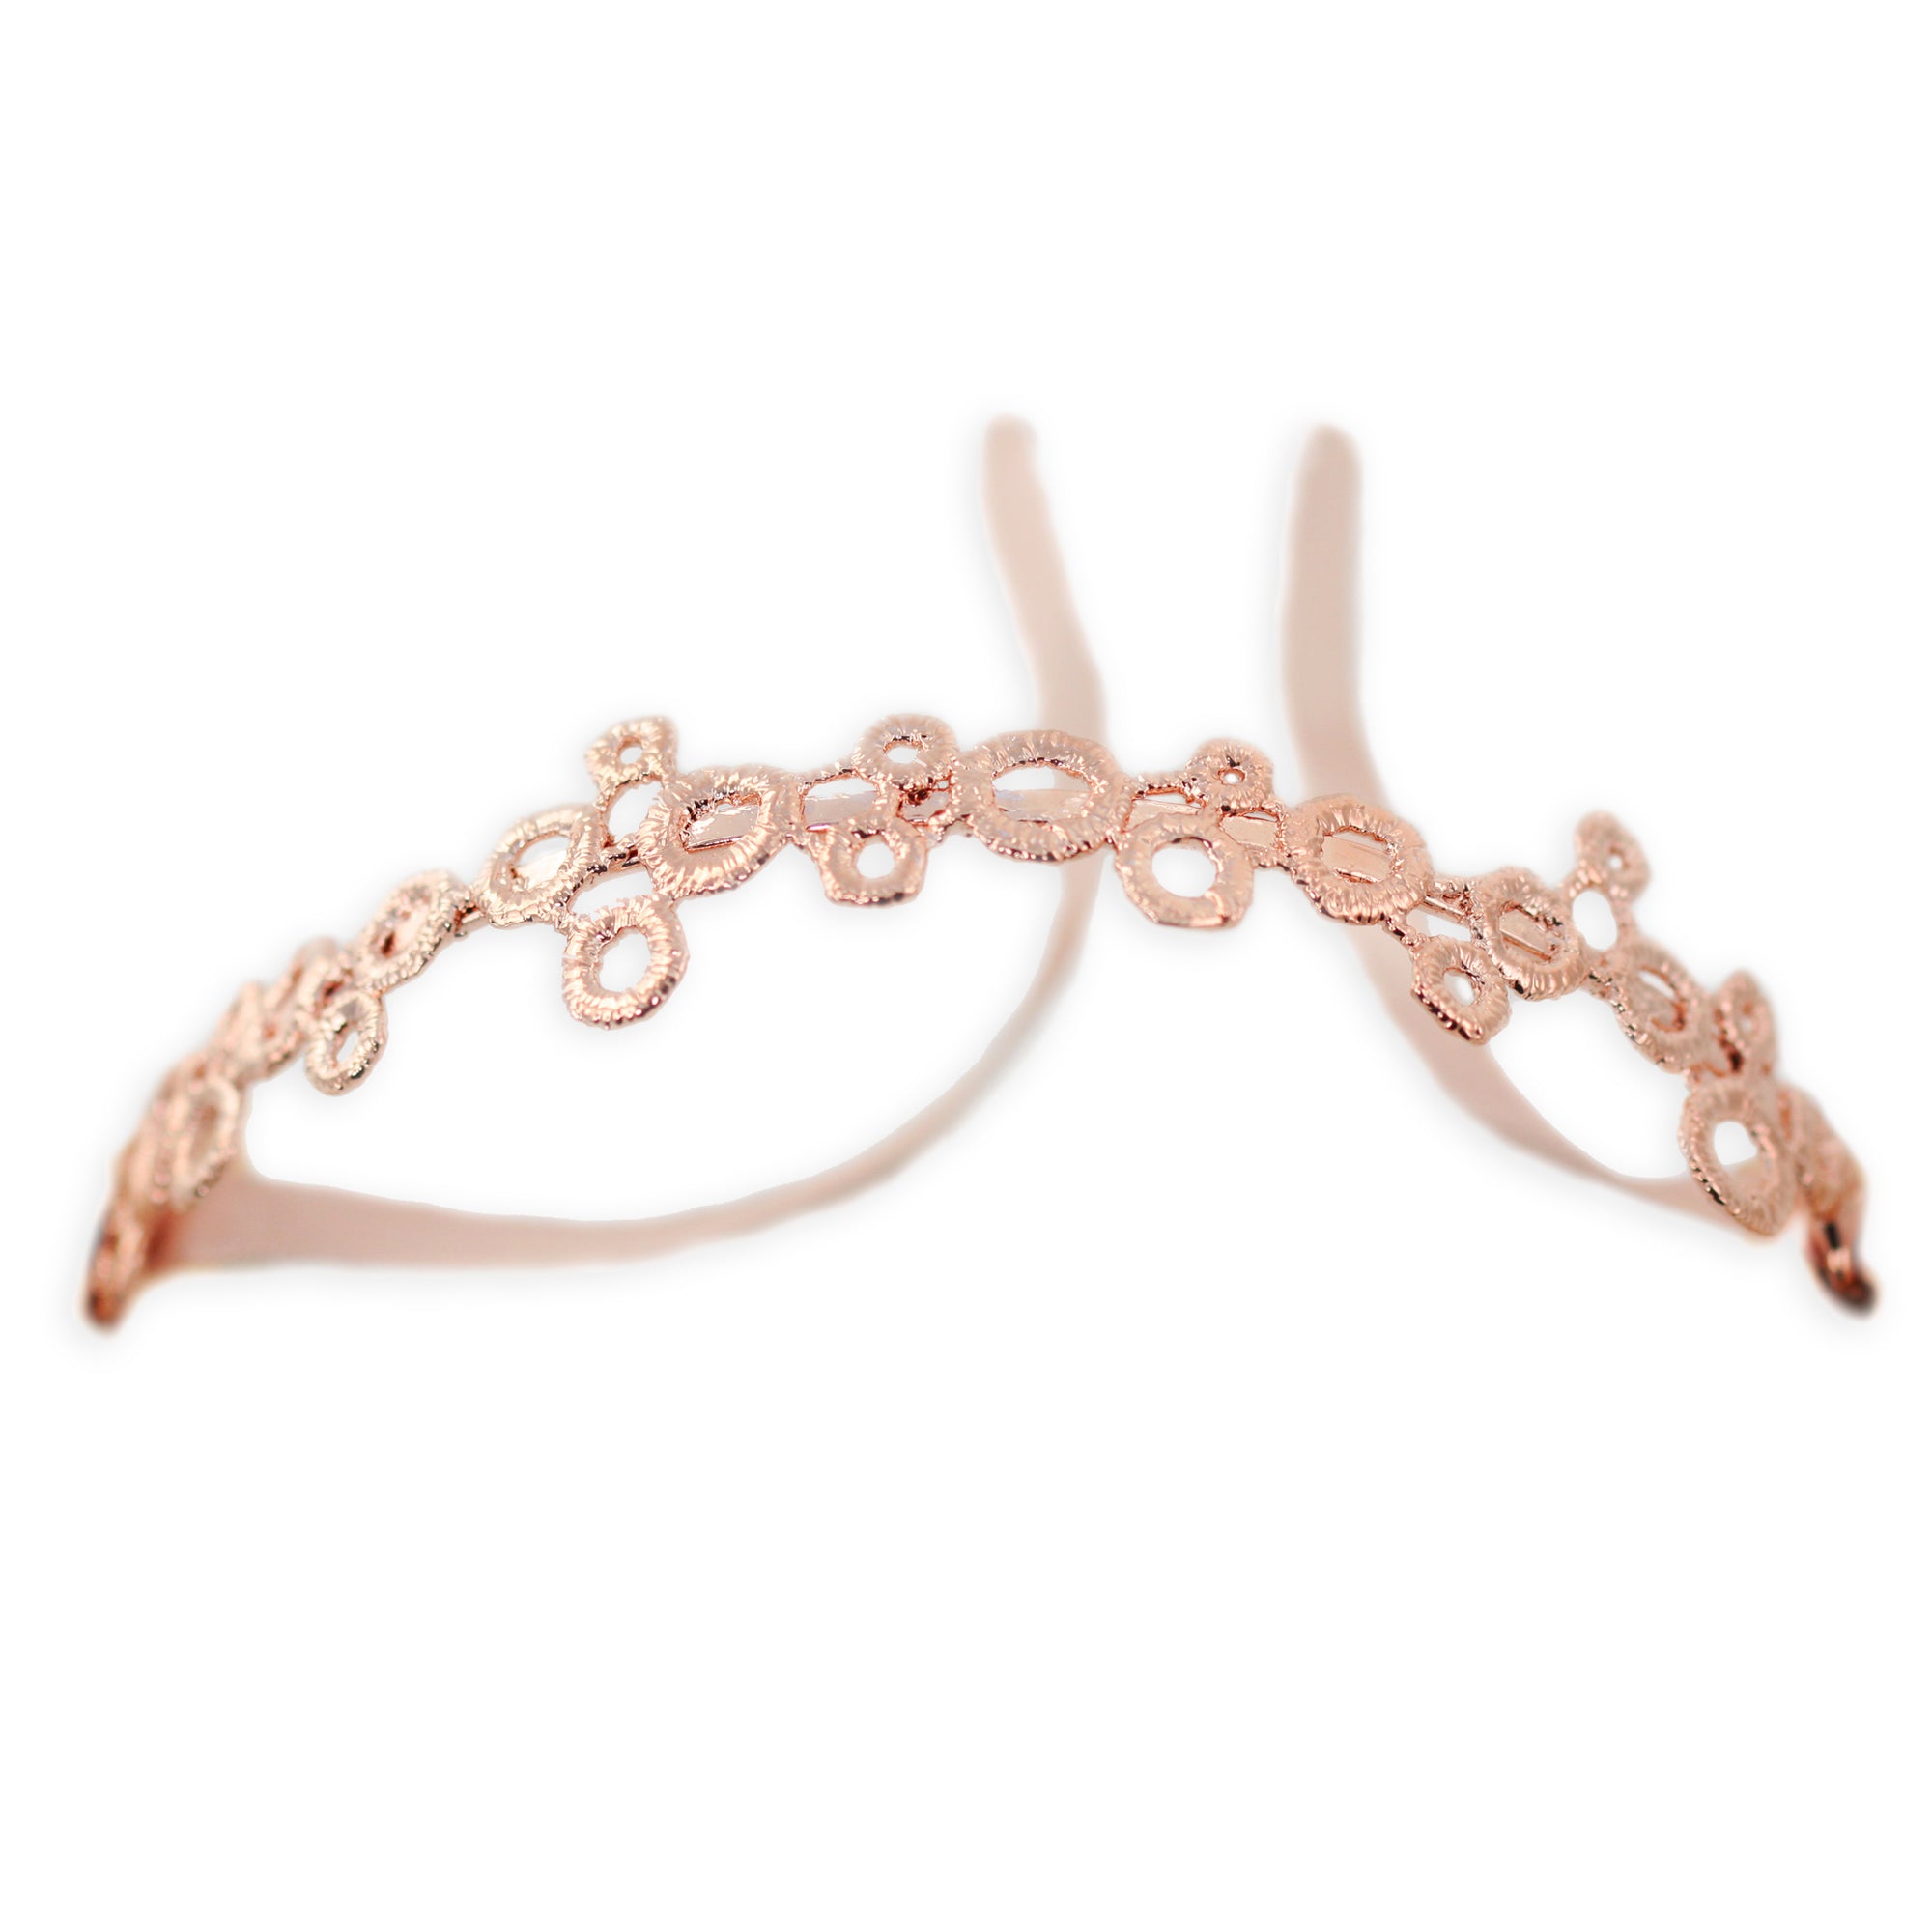 Original lace tiara solidified in rose gold with silk ribbons.